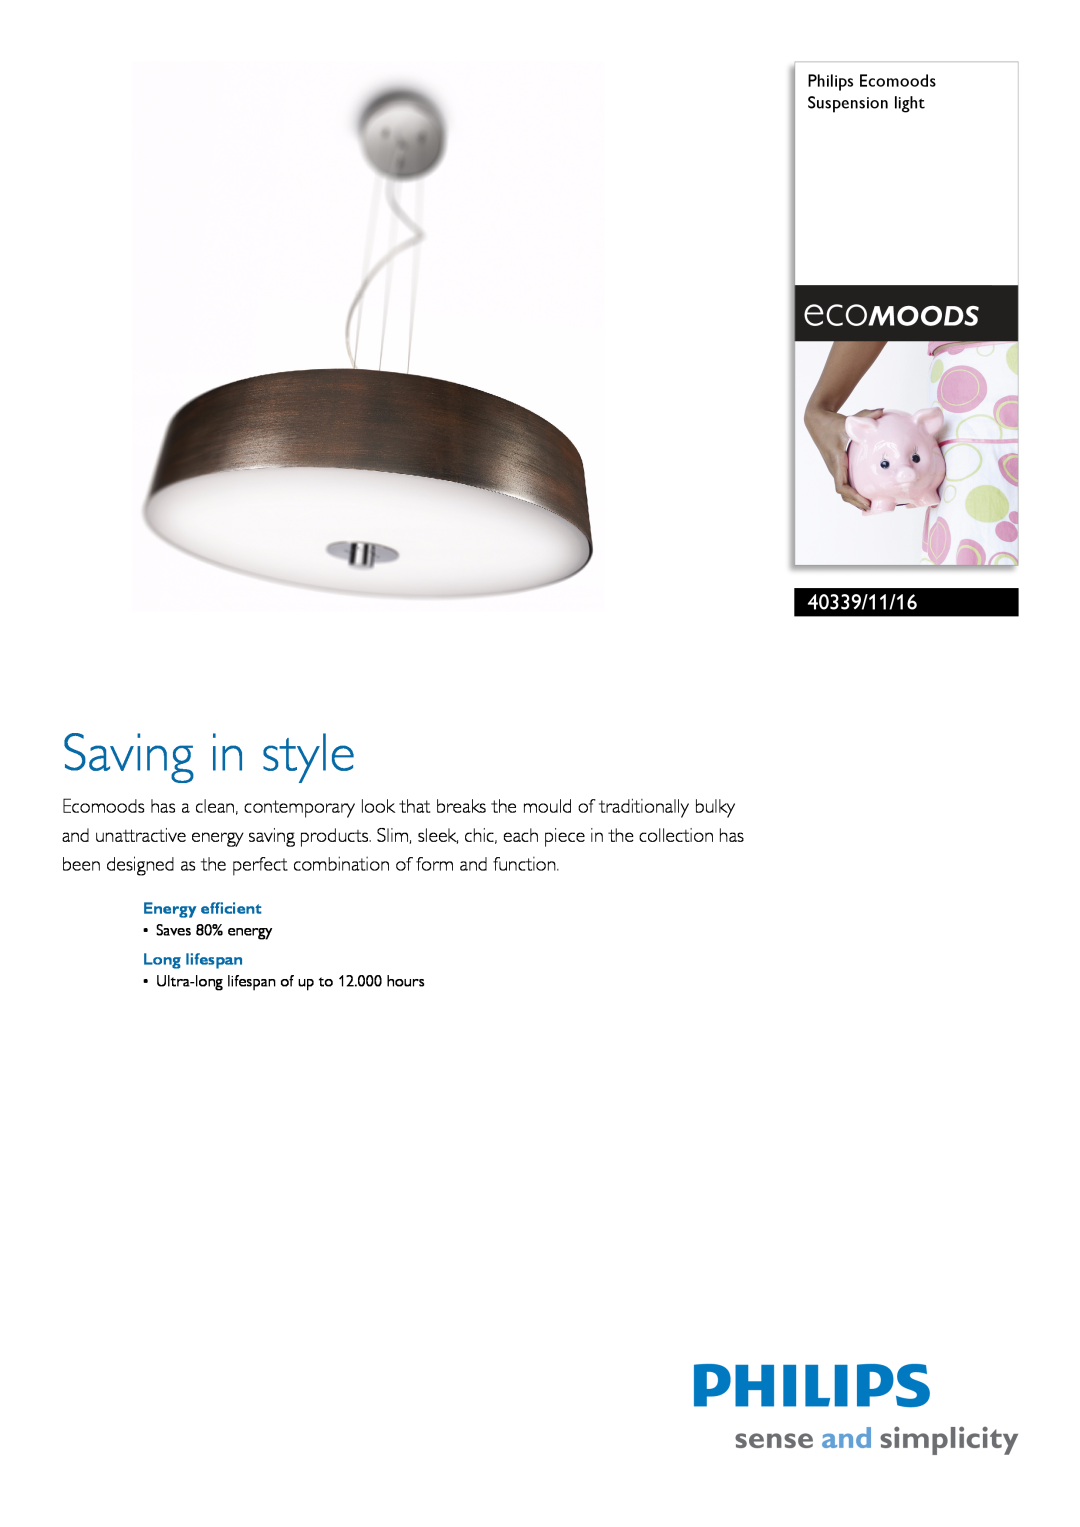 Philips 40339/11/16 manual Philips Ecomoods Suspension light, Energy efficient, Long lifespan, Saving in style 